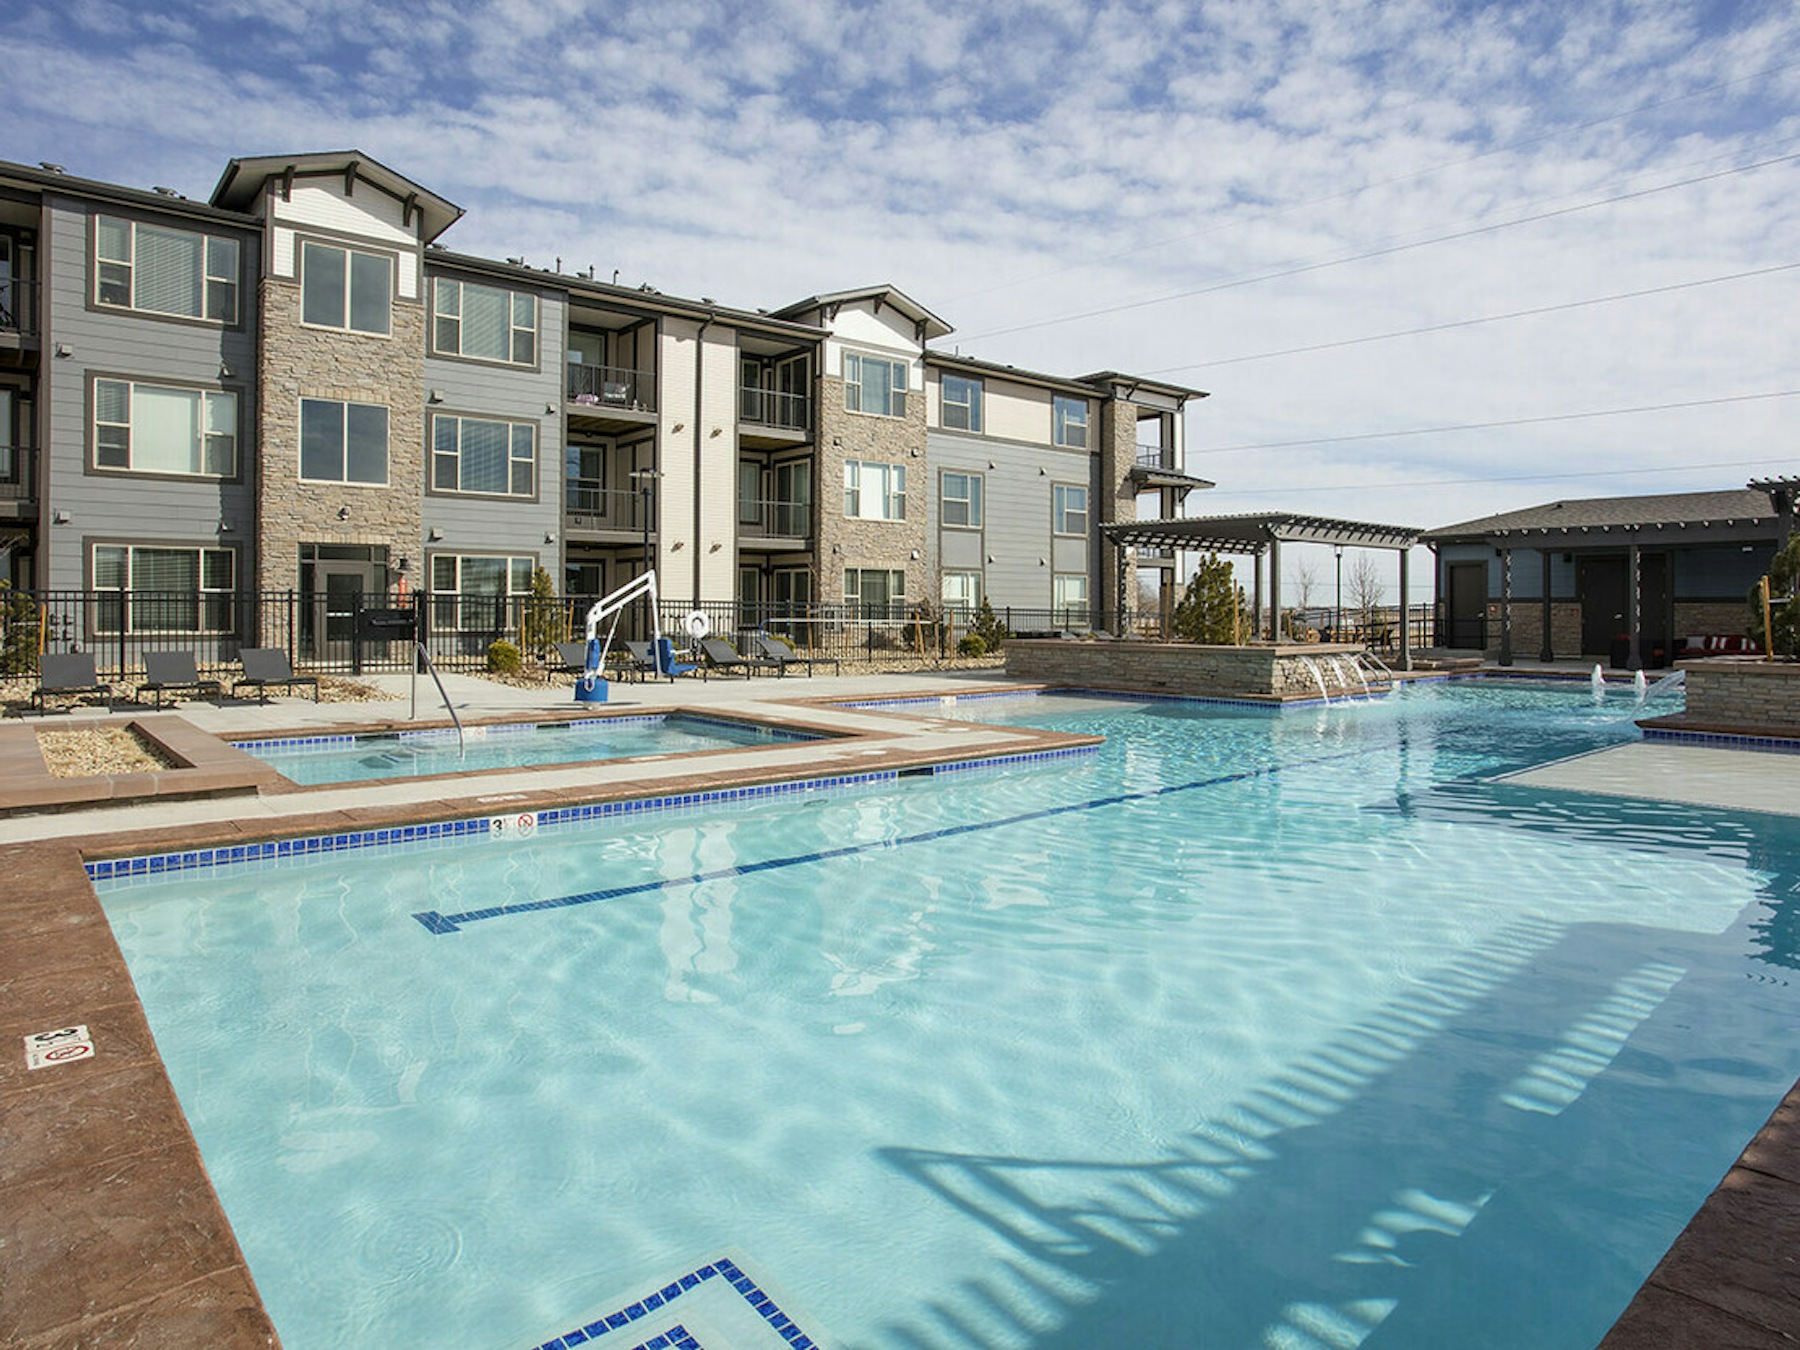 Union pointe apartments longmont co resort style swimming pool and hot tub